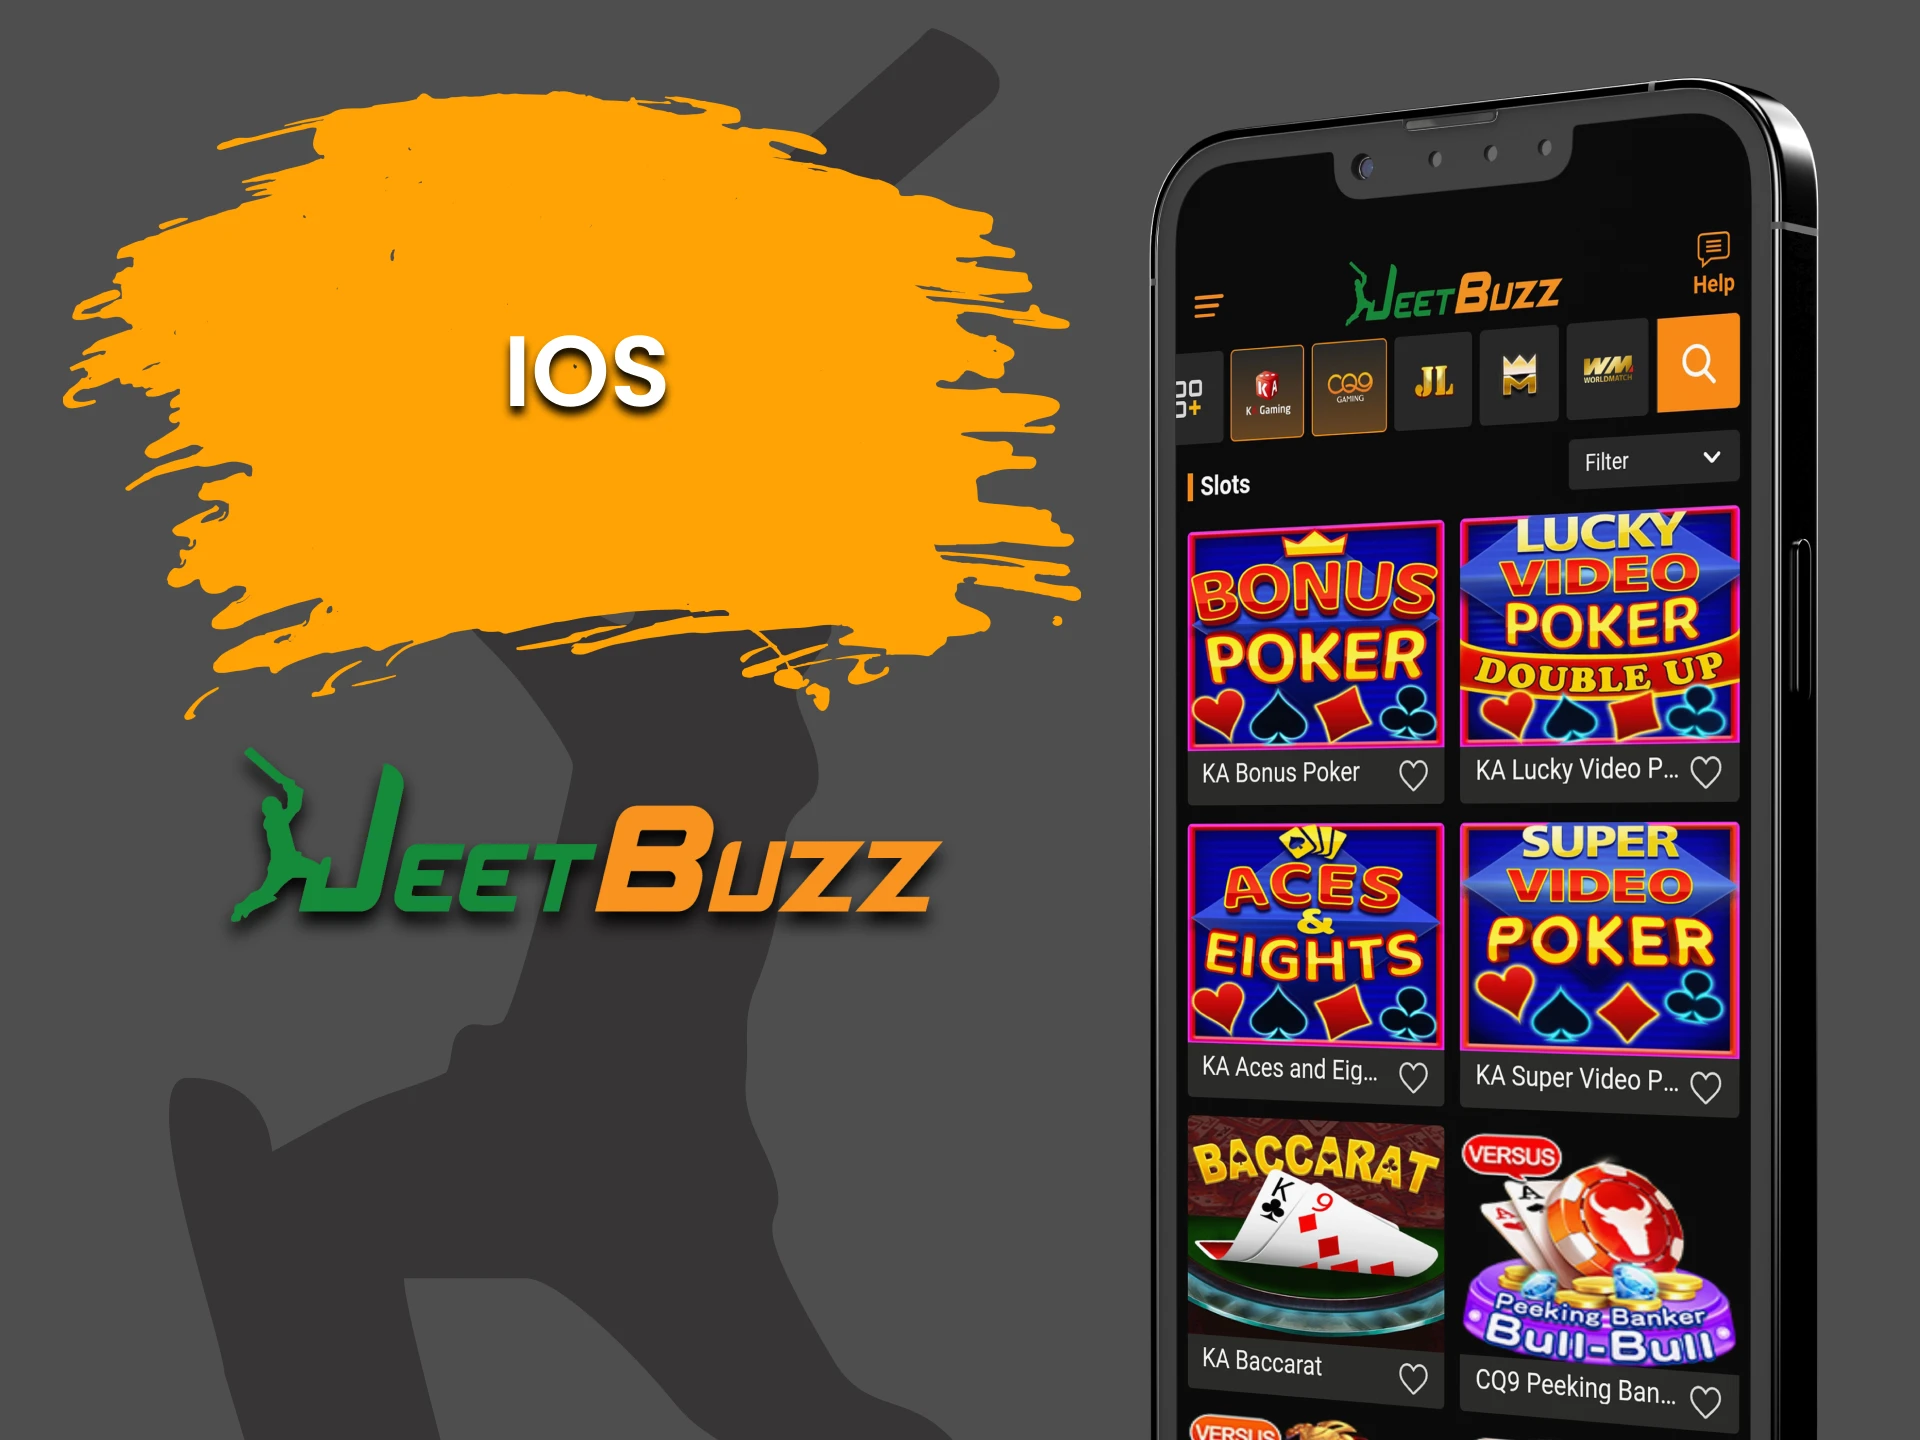 Download the JeetBuzz board game app for iOS.